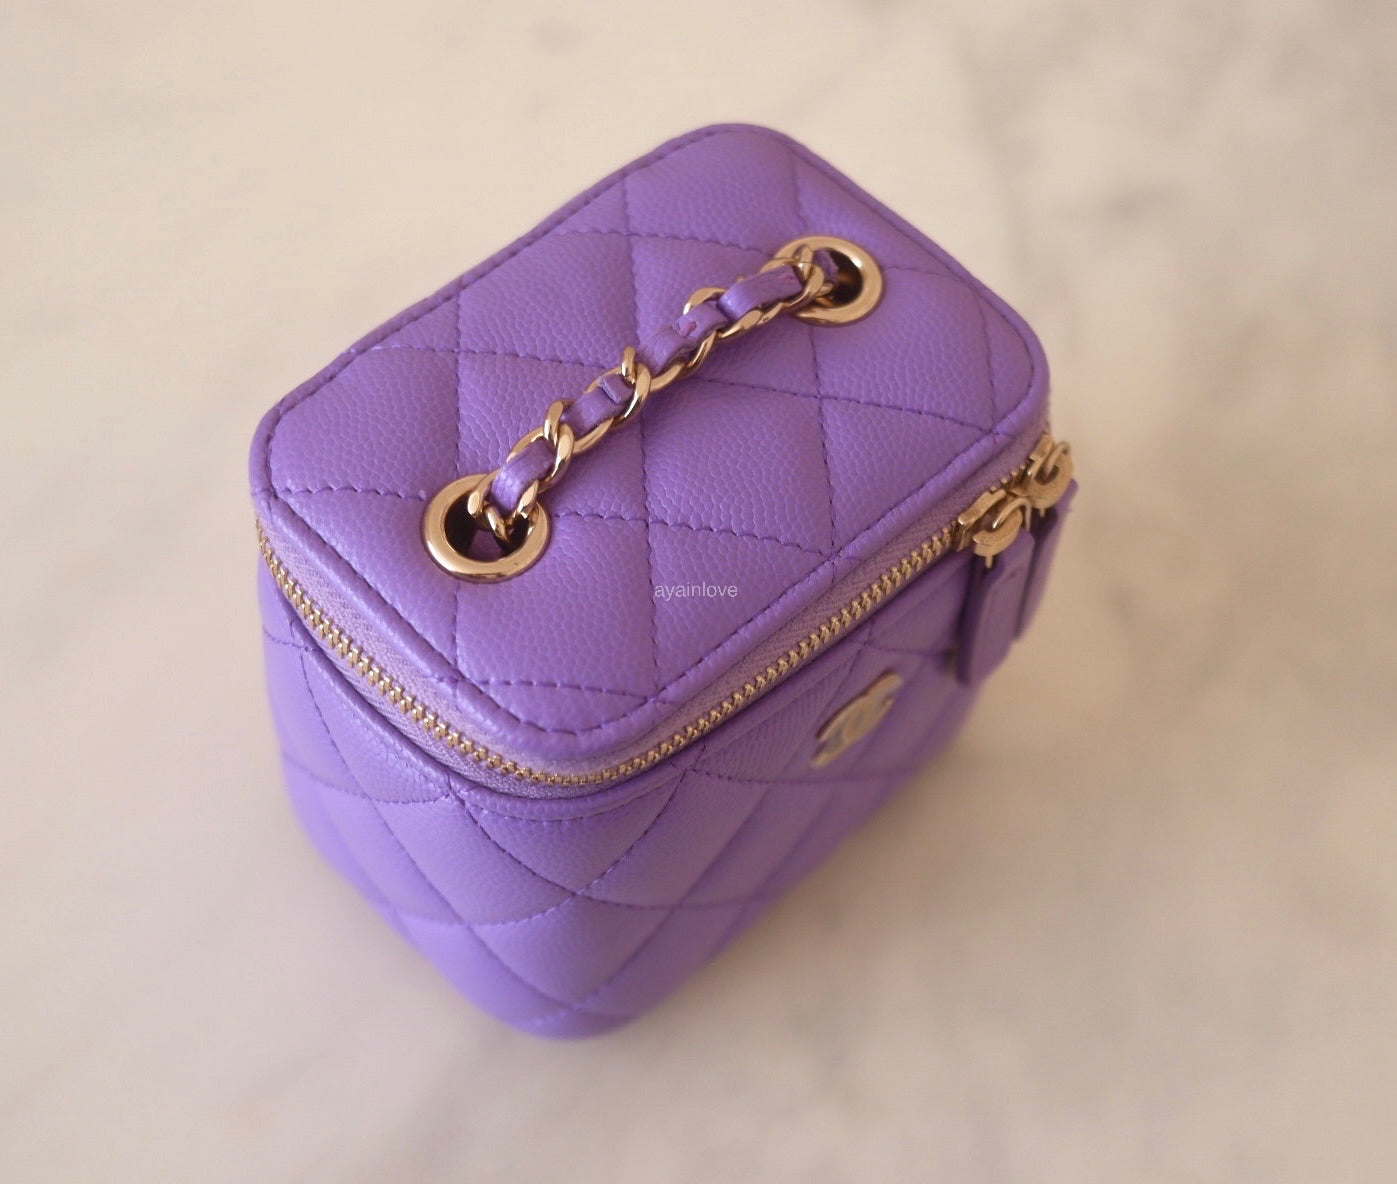 CHANEL 20S Purple Caviar Classic Square Vanity on Chain Light Gold Har –  AYAINLOVE CURATED LUXURIES